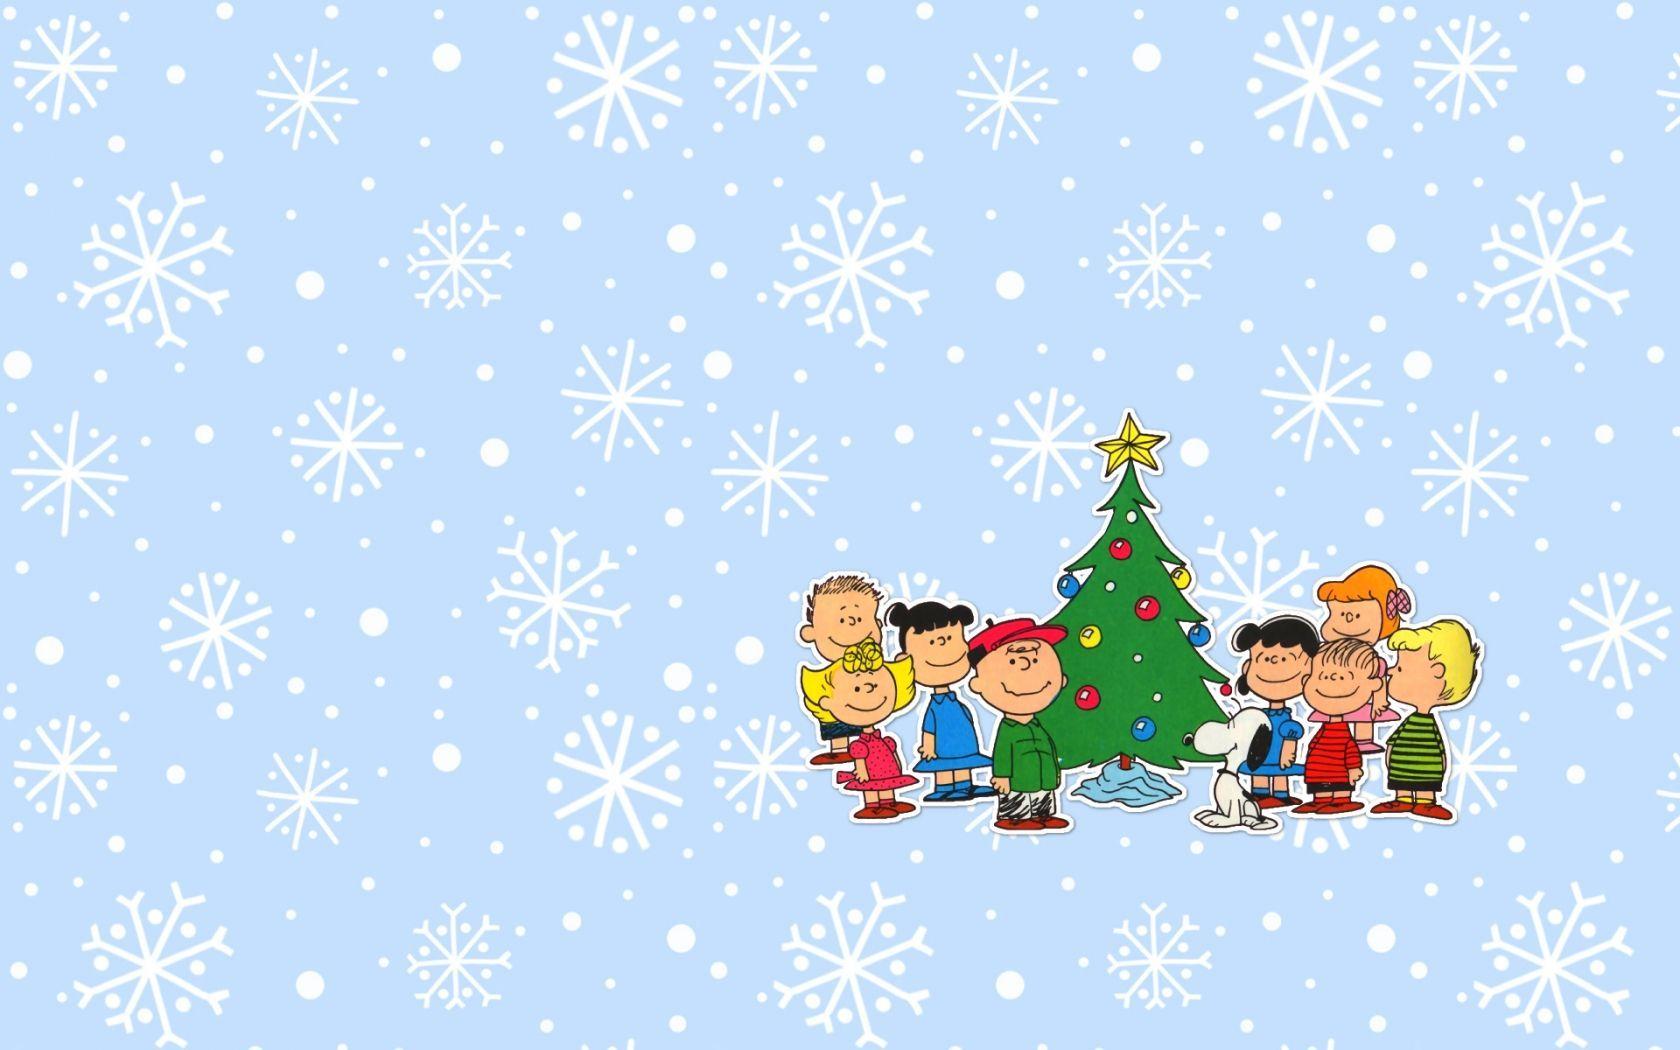 Charlie Brown Christmas Wallpaper Background. background